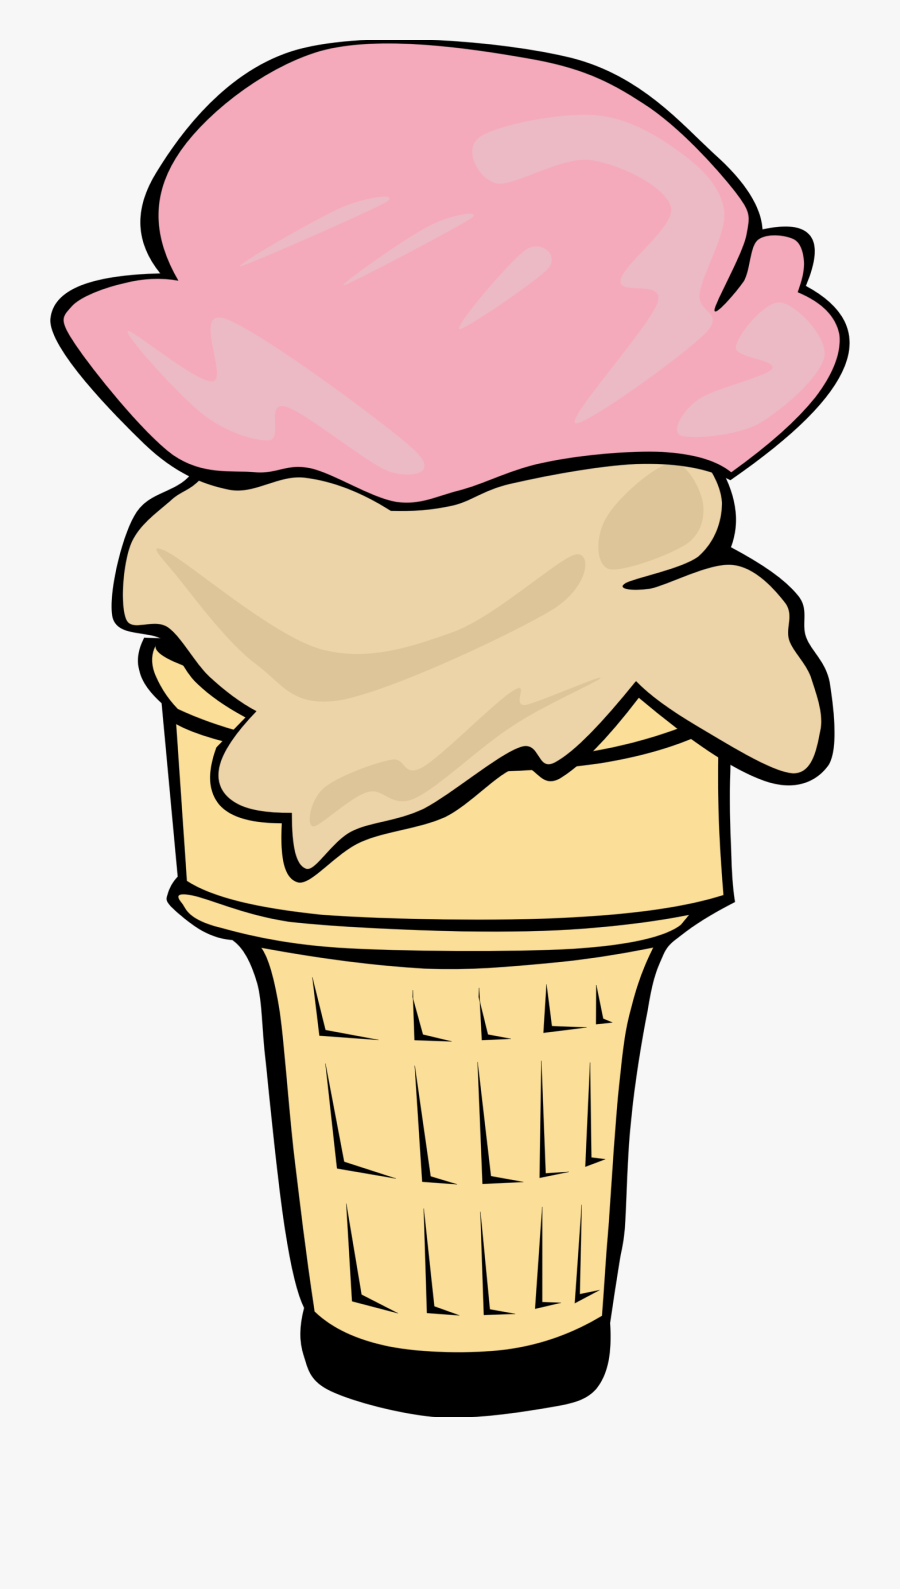 Ice Clipart At Getdrawings - Ice Cream Cone Clip Art, Transparent Clipart